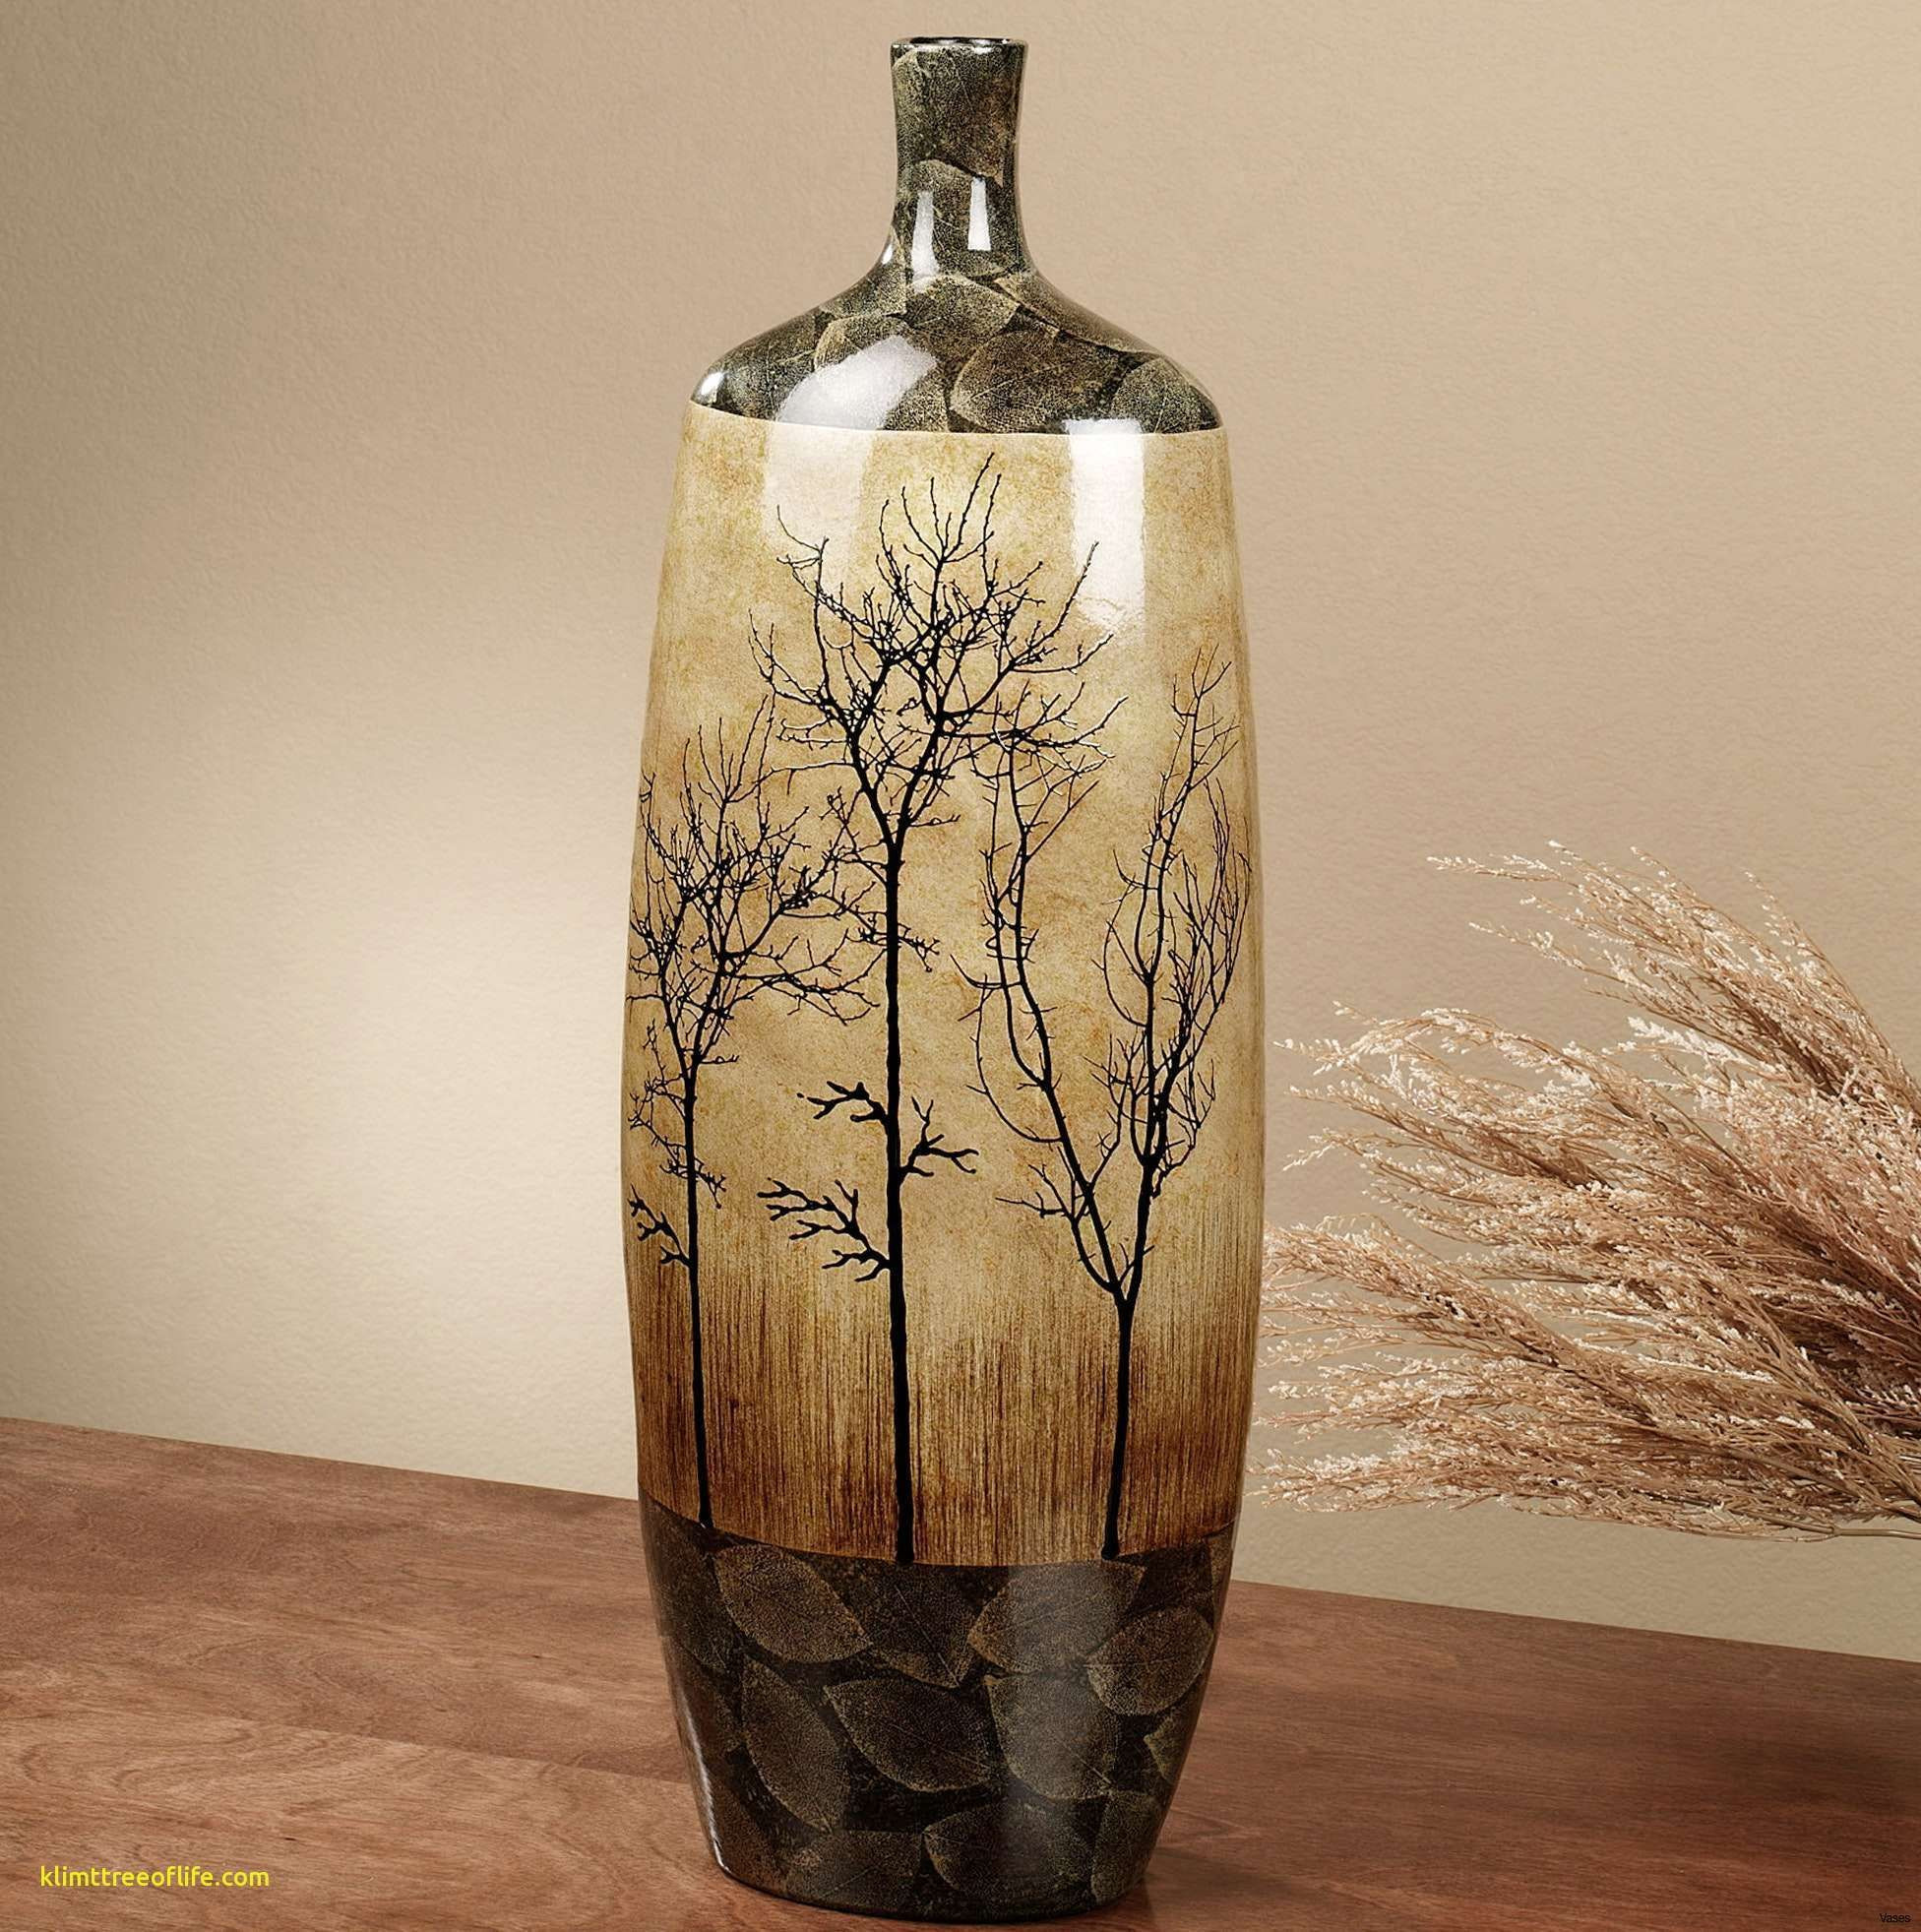 30 Great Rectangular Ceramic Vase 2024 free download rectangular ceramic vase of large vase decor inspirational 39 awesome vase decoration ideas with regard to large vase decor inspirational 39 awesome vase decoration ideas graphics